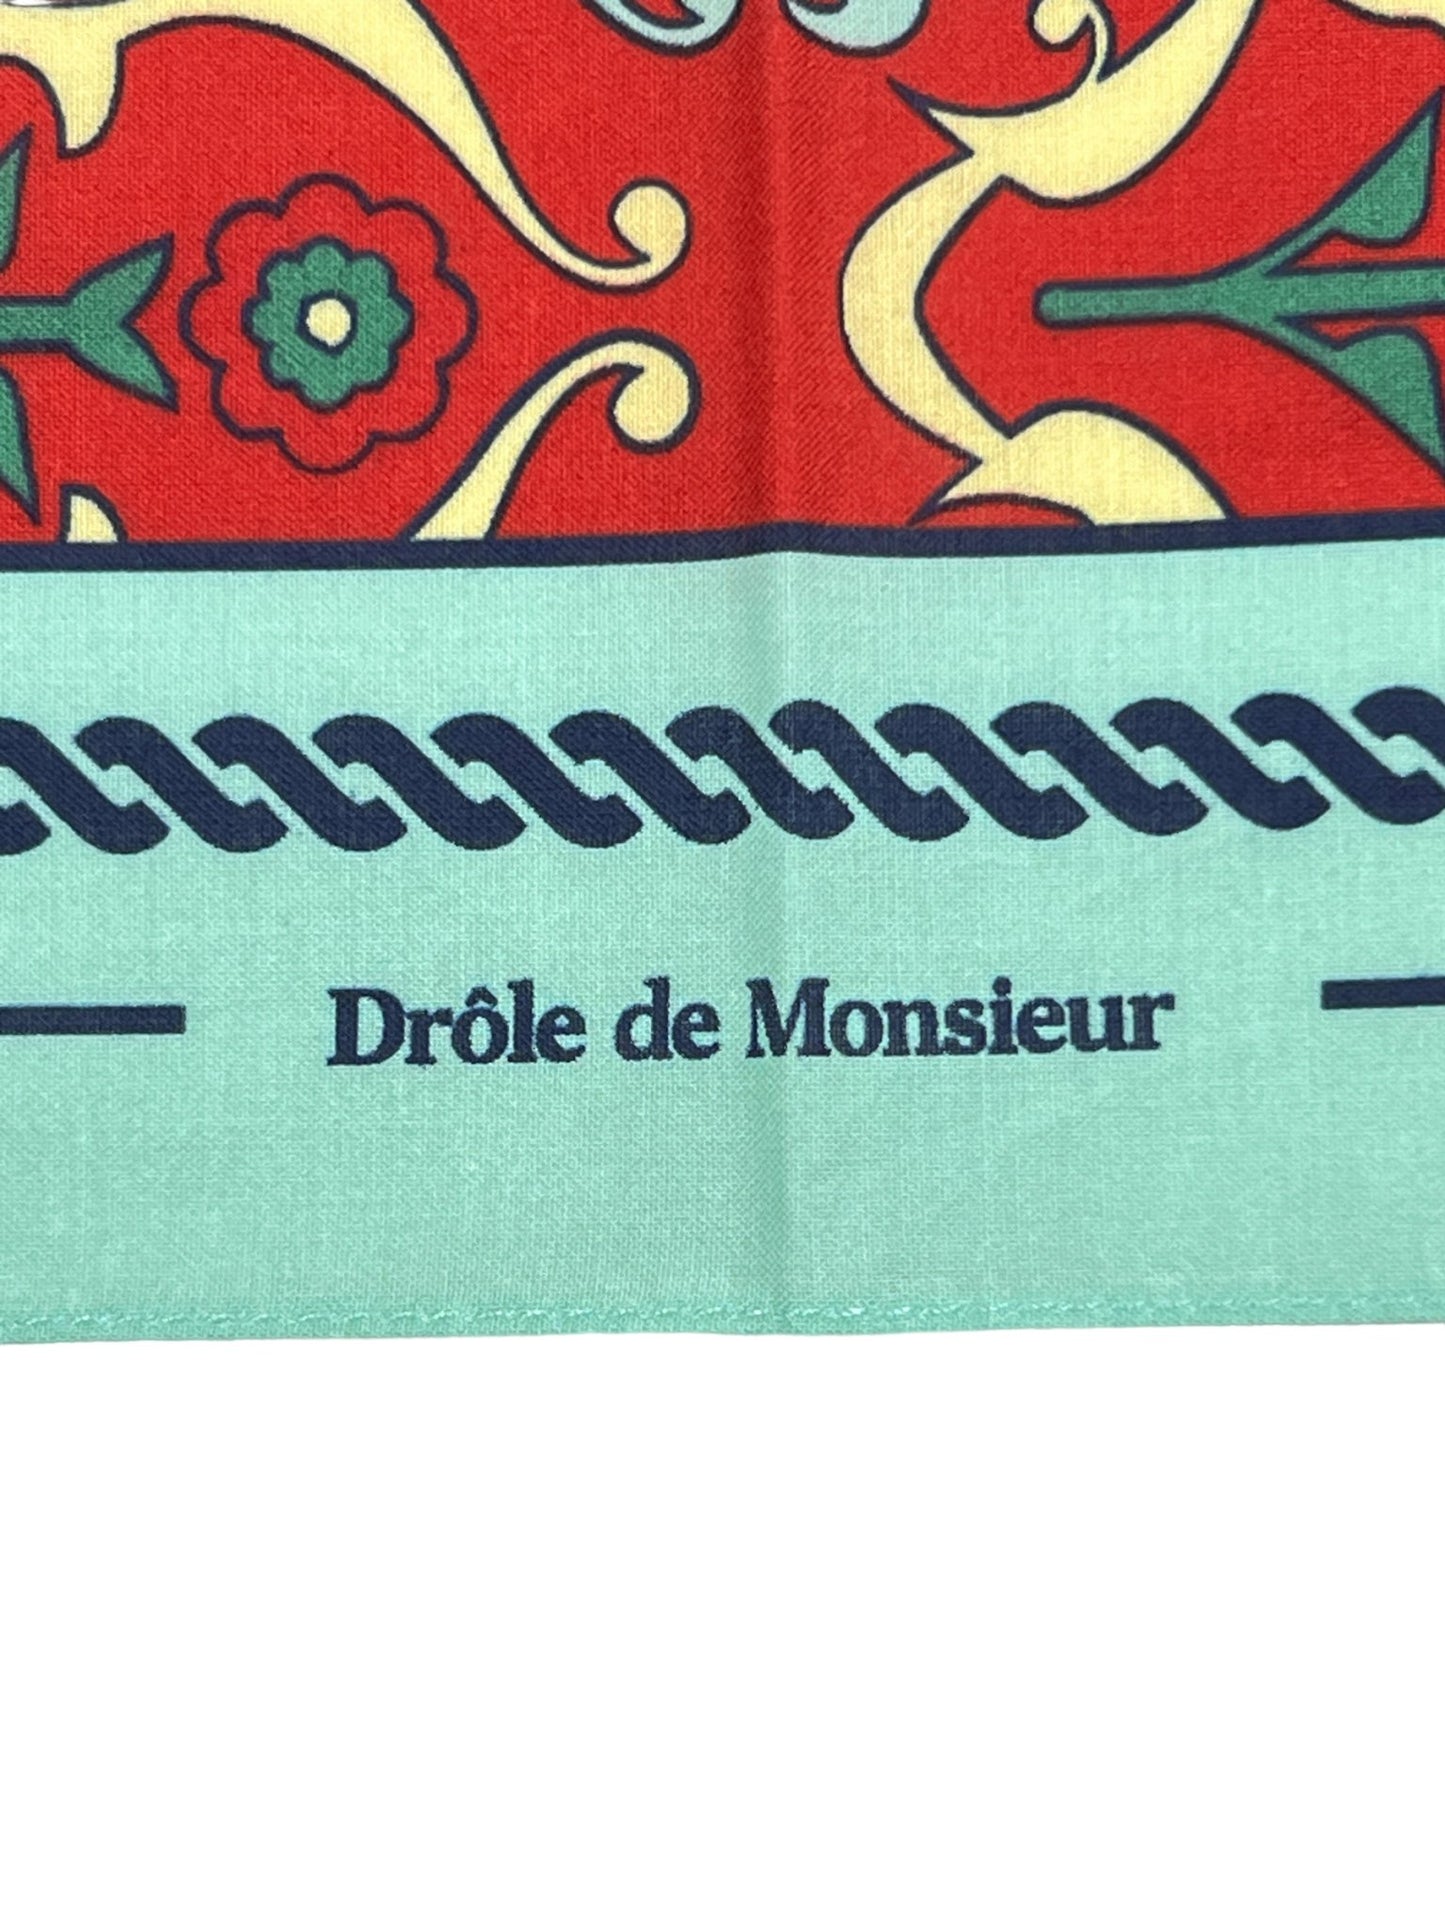 Red and teal DROLE DE MONSIEUR D-BA002-CO128-RD LE FOULARD ORNEMENTS scarf printed with the text "drôle de monsieur" and an ornaments pattern.